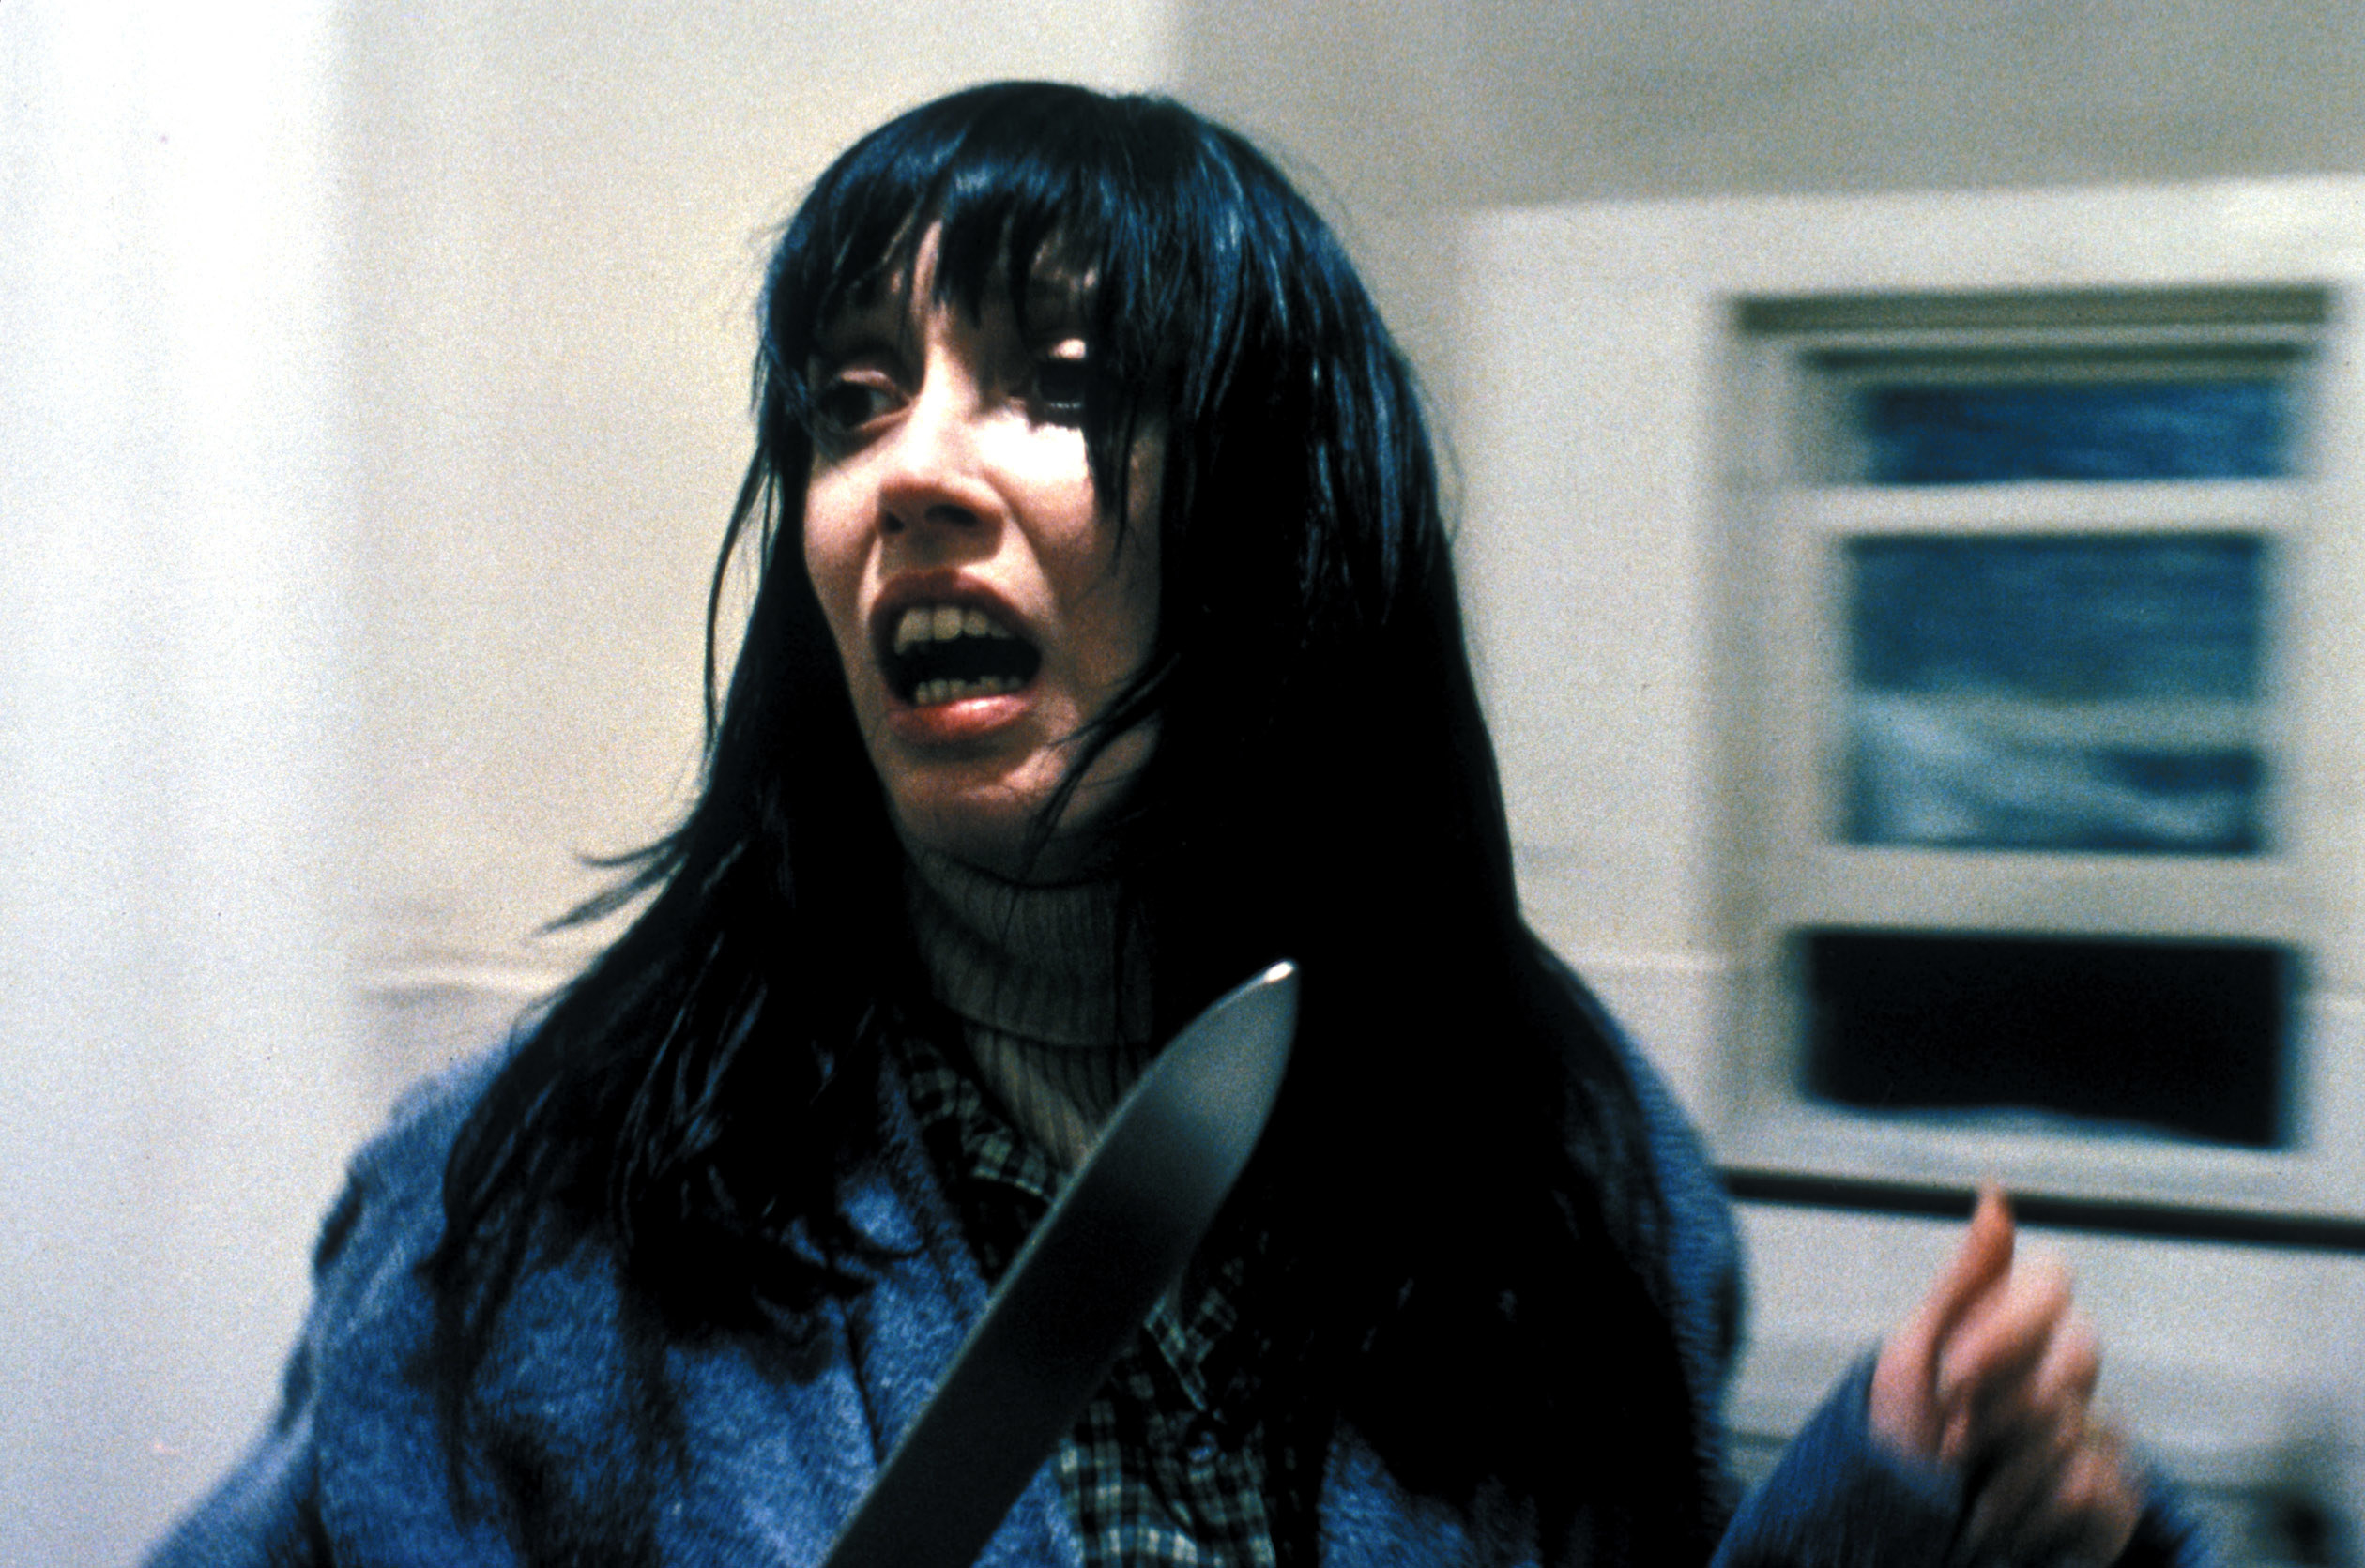 Shelly with a knife looking scared in the film